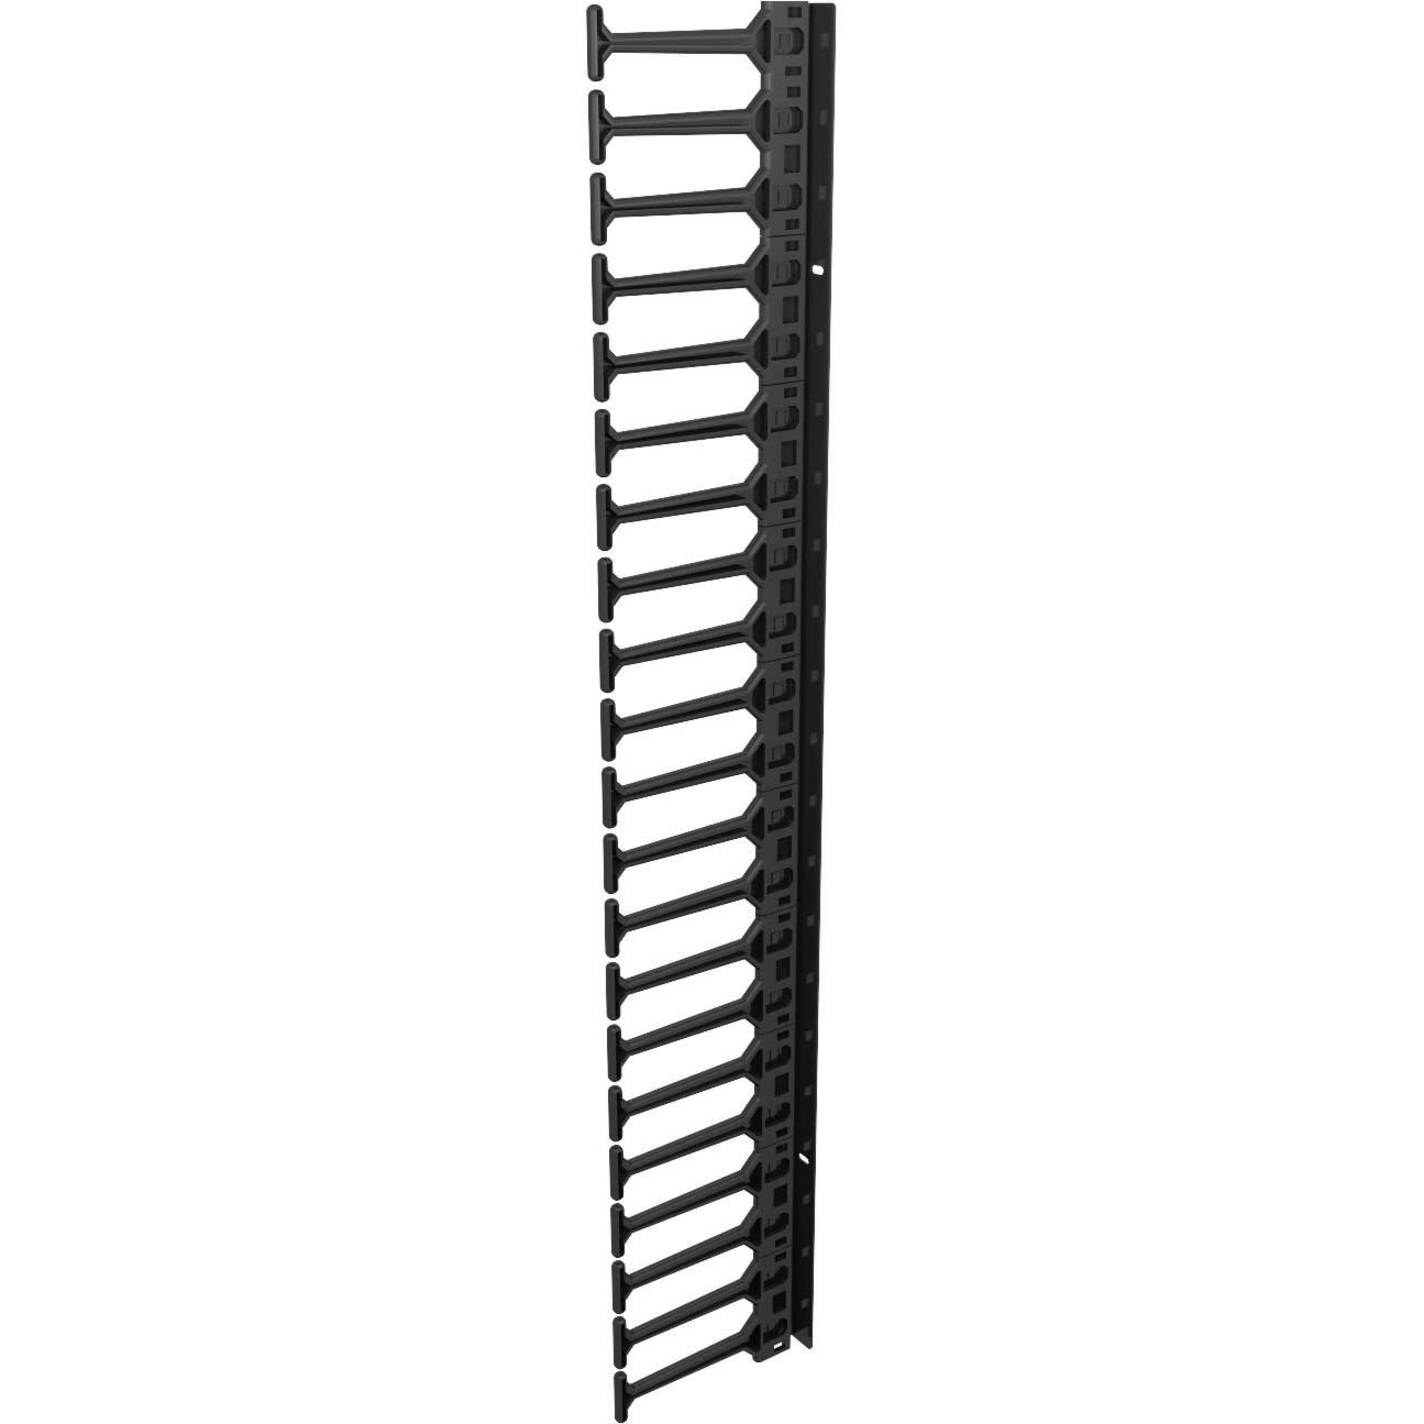 VERTIV VRA1014 Vertical Cable Manager 600mm Wide 42U, Cable Routing Panel